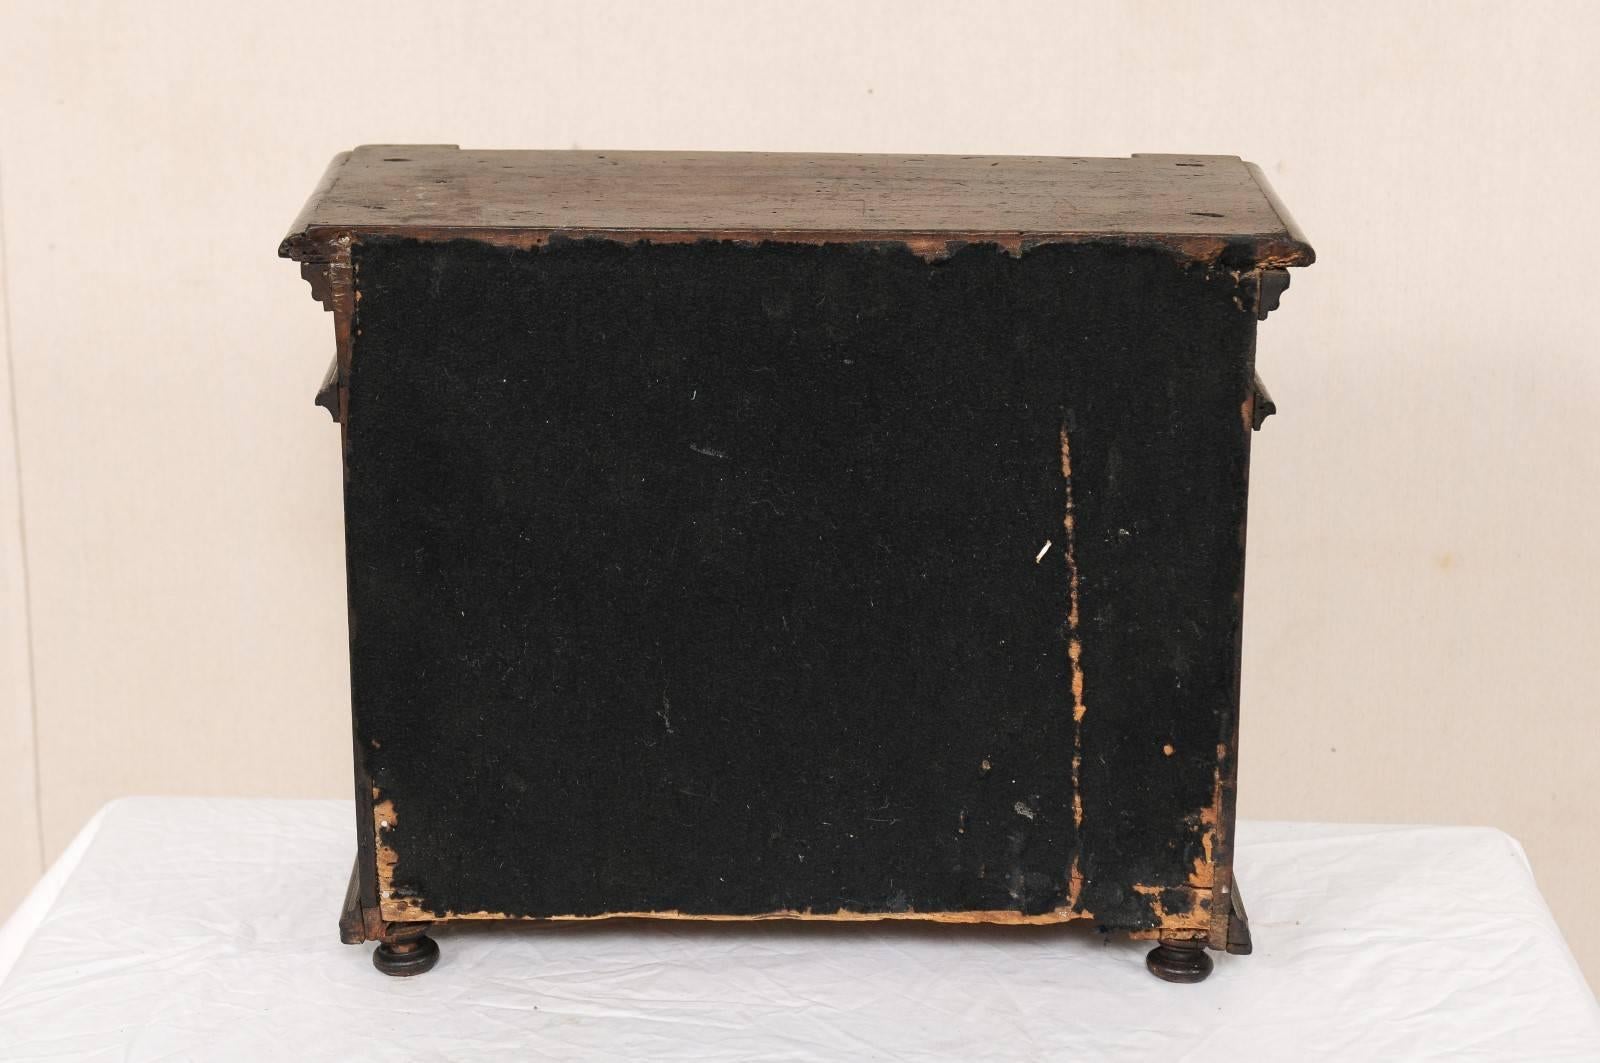 Italian Early 18th Century Petite-Sized Walnut Chest w/Drawers for Table-Top  For Sale 5